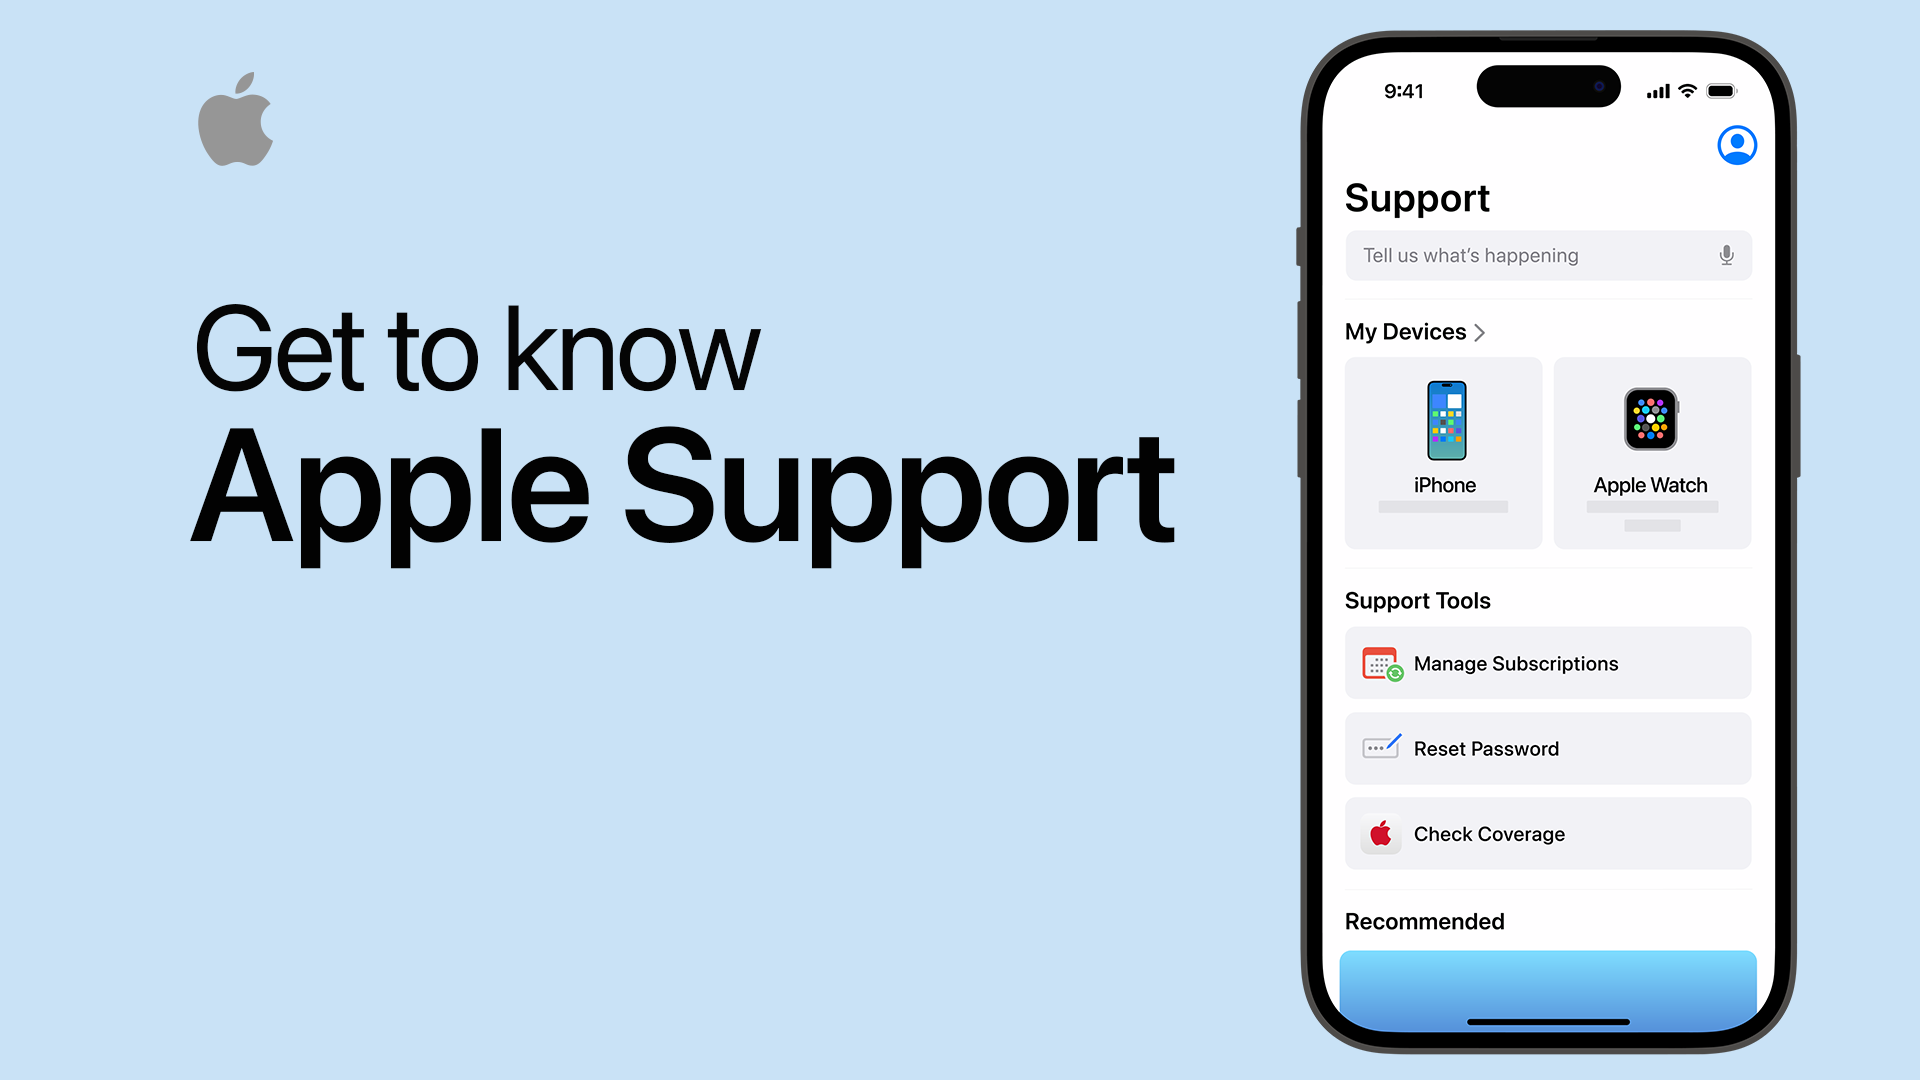 - Apple Support